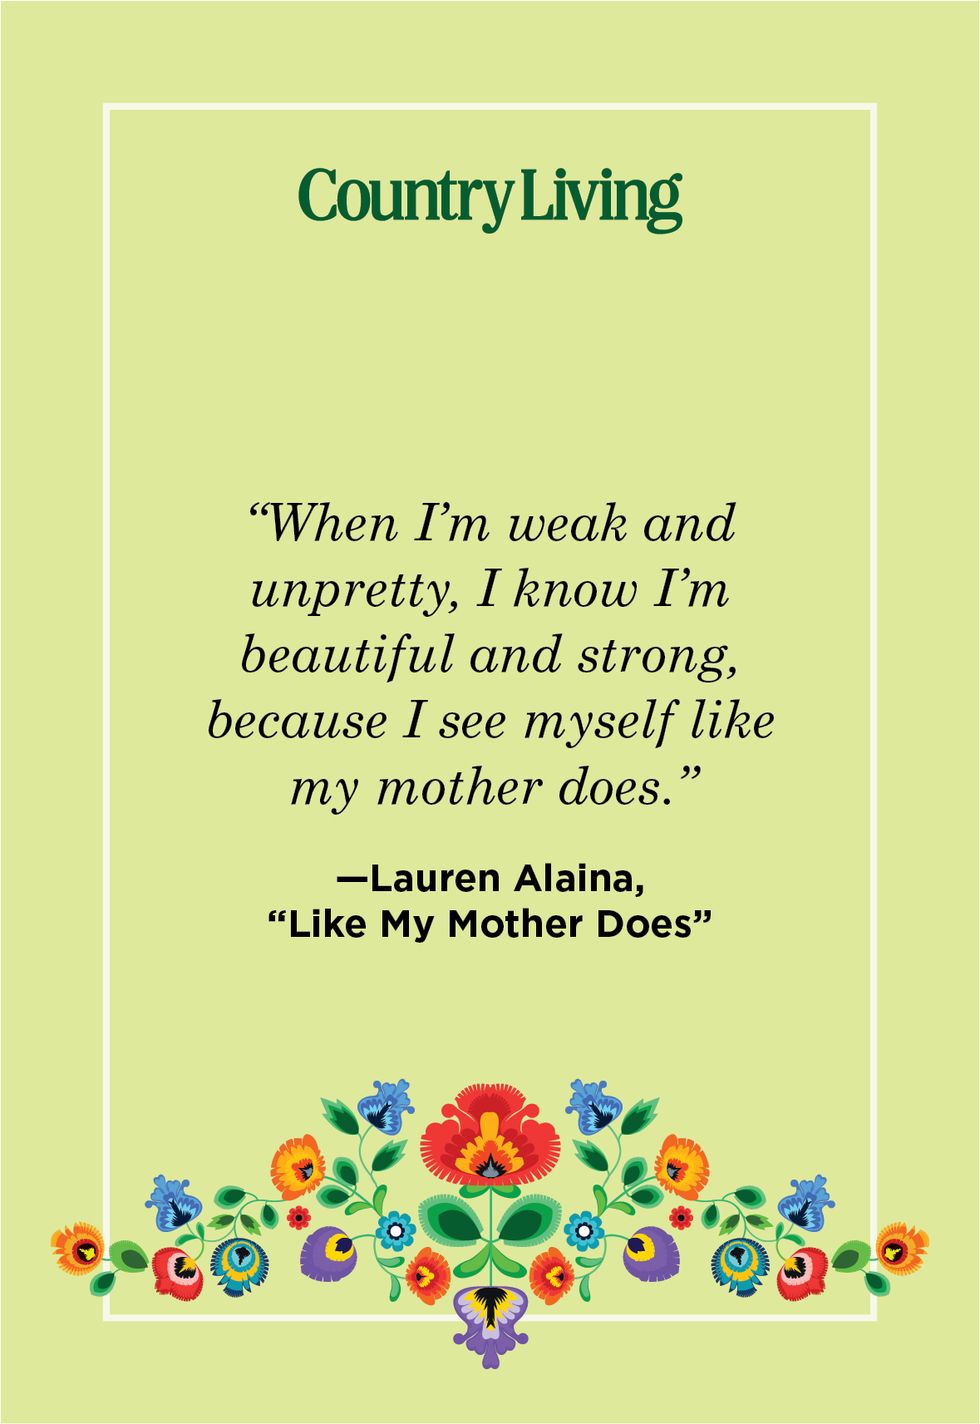 touching motherdaughter quote from lauren alaina song lyrics